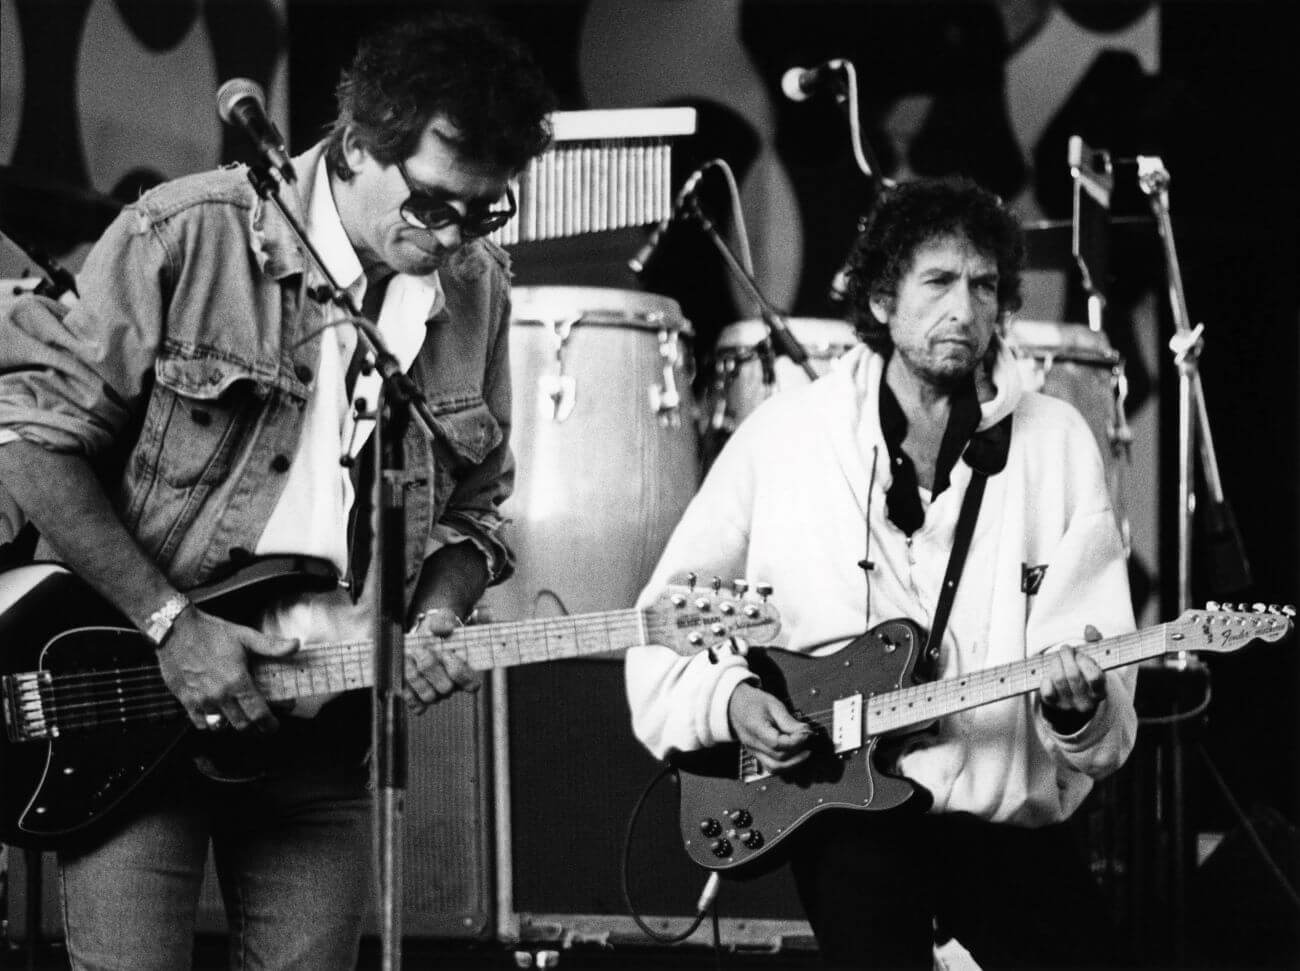 A black and white picture of Keith Richards and Bob Dylan playing guitars onstage.